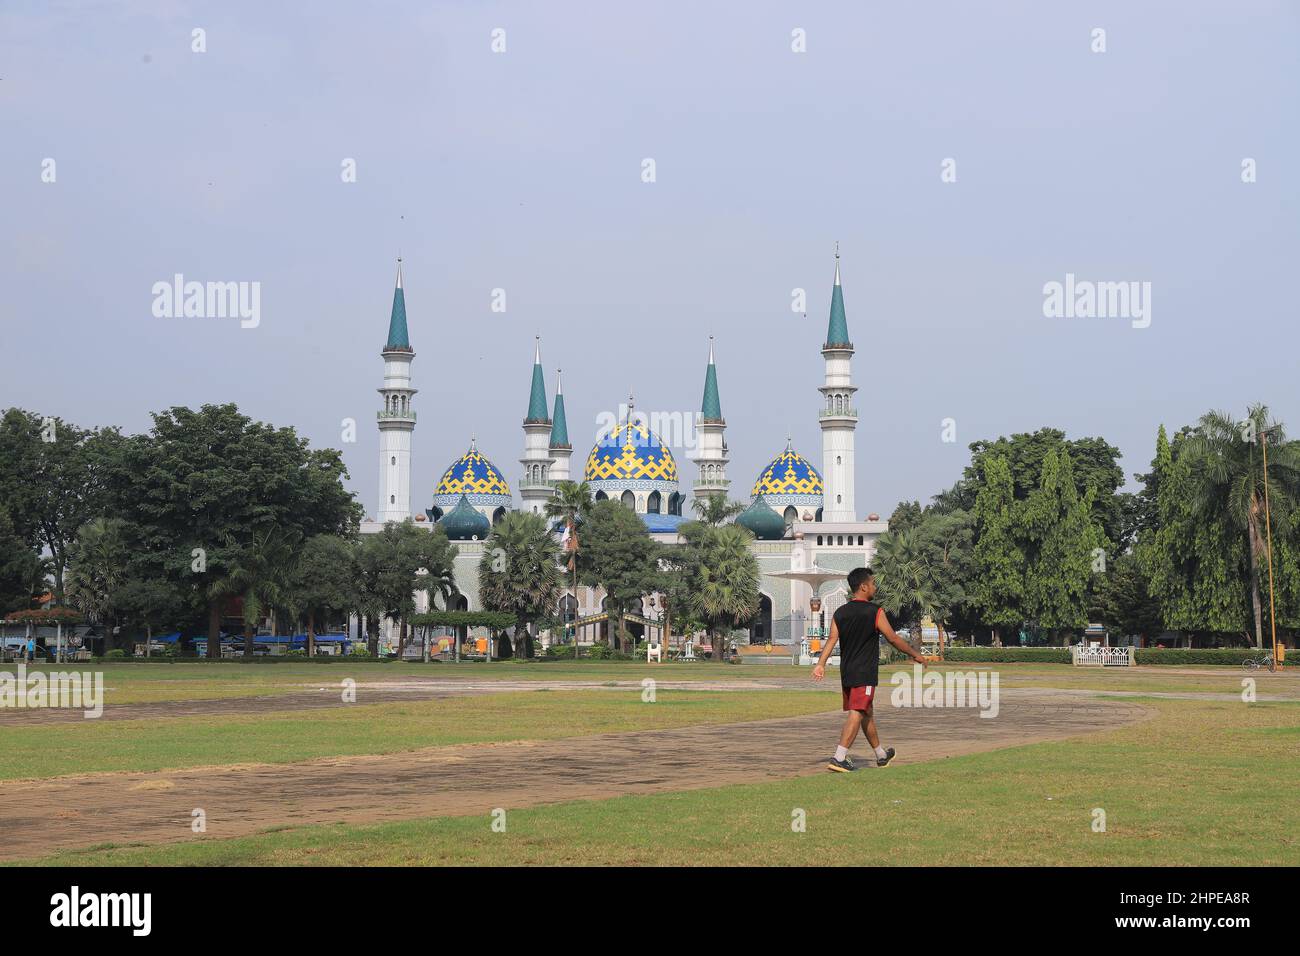 Tuban, Indonesia - January 25, 2022: The Great Mosque of Tuban (Masjid Agung) Stock Photo